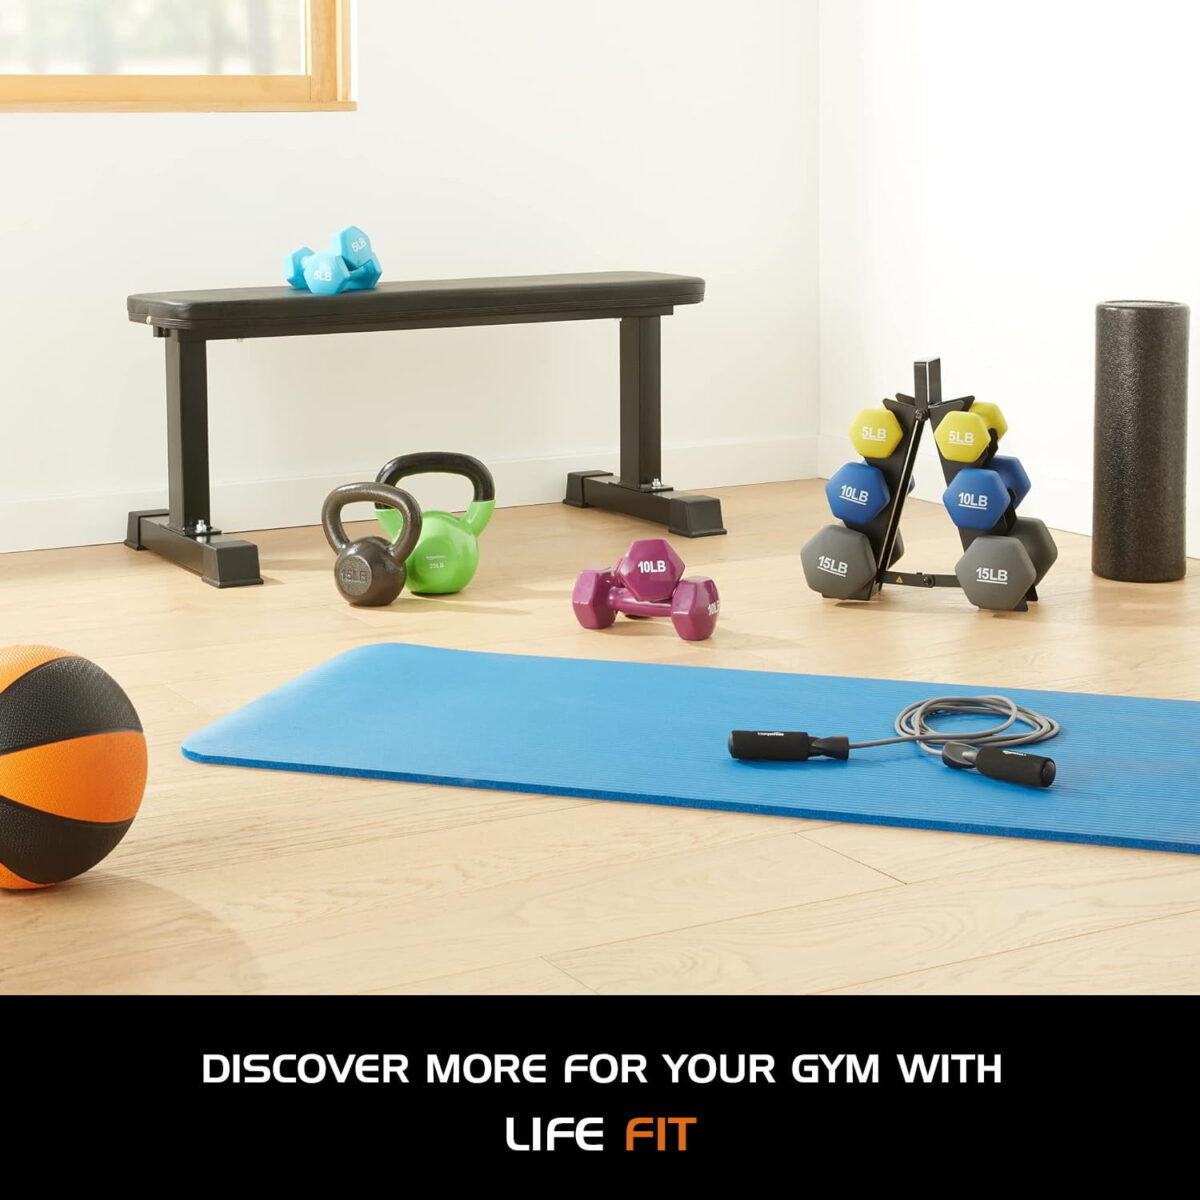 A well-equipped gym featuring a diverse range of exercise machines, weights, and workout stations.